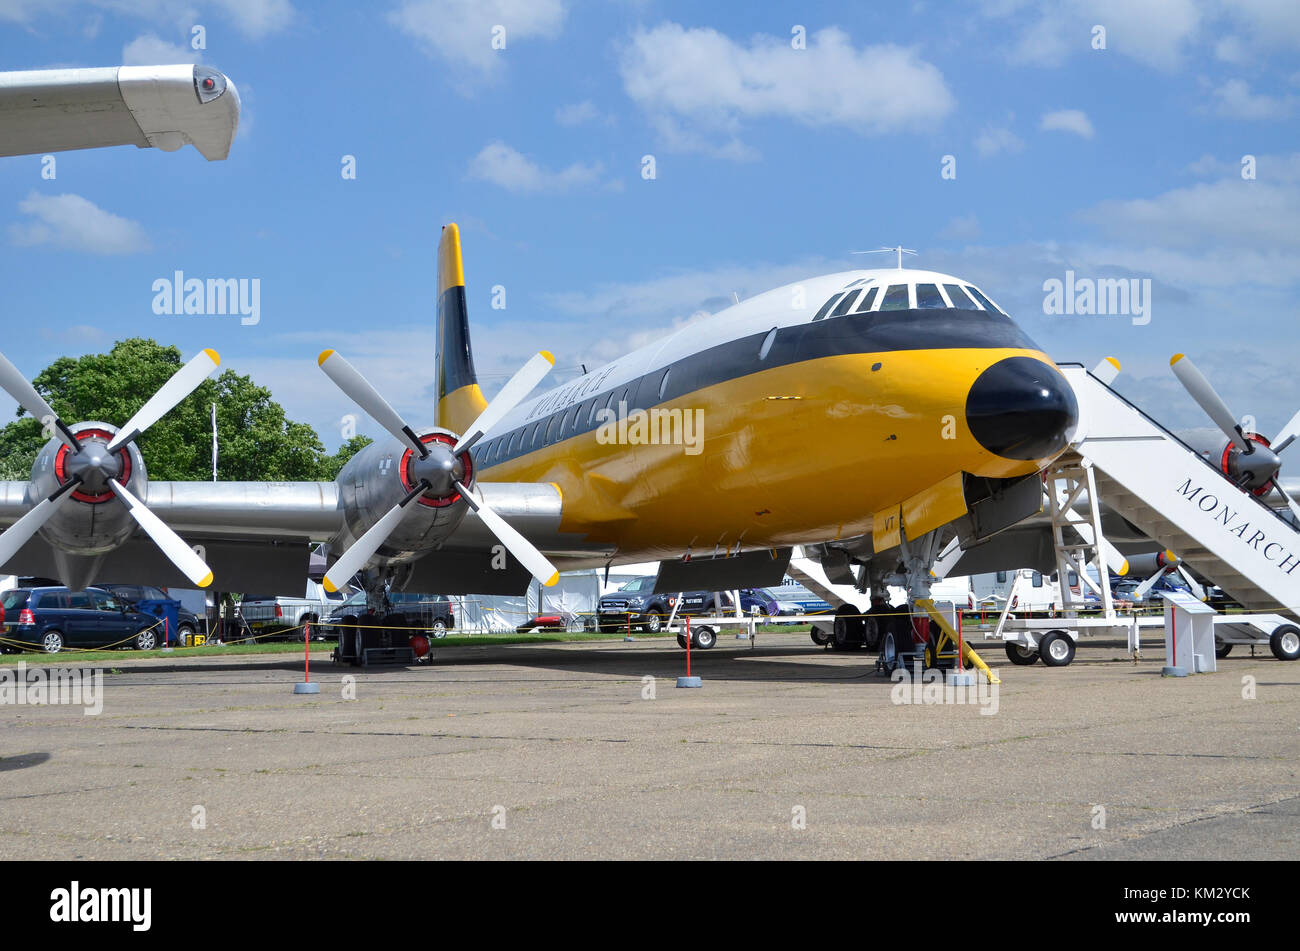 Bristol Brittania 312 in Monarch Airlines markings, Duxford, UK. Stock Photo